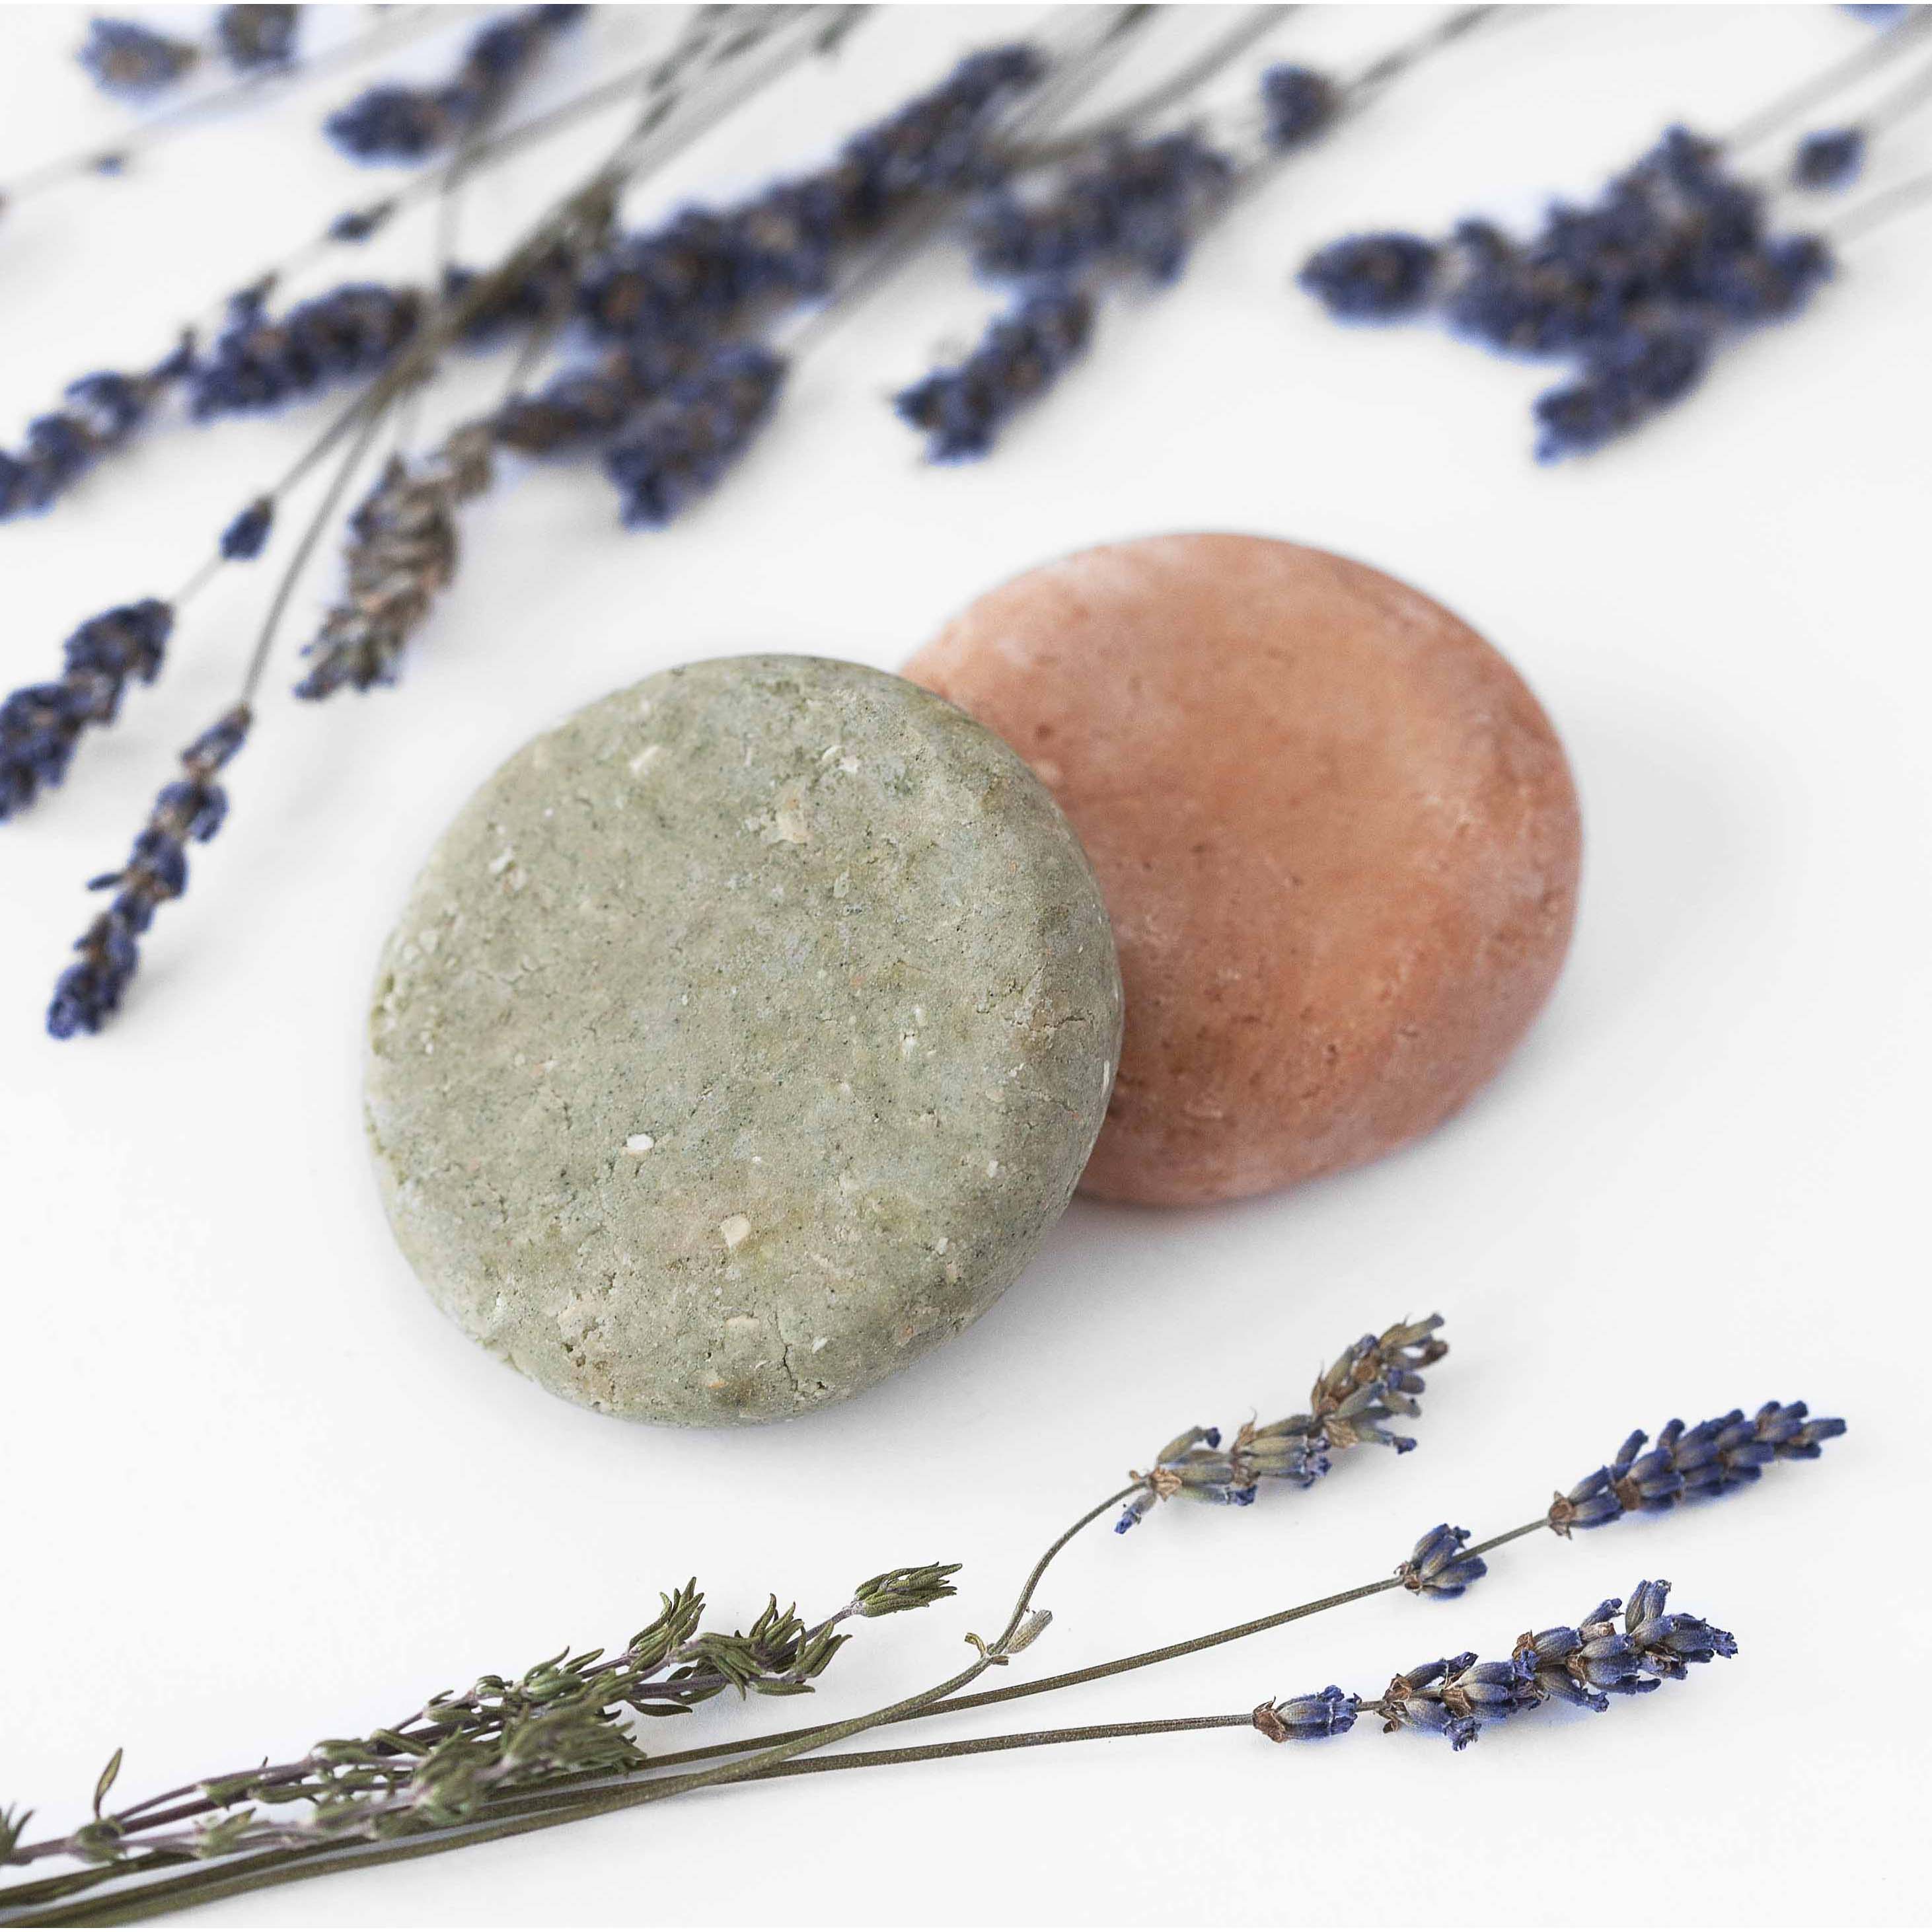 3 reasons why shampoo bars are a “must try”